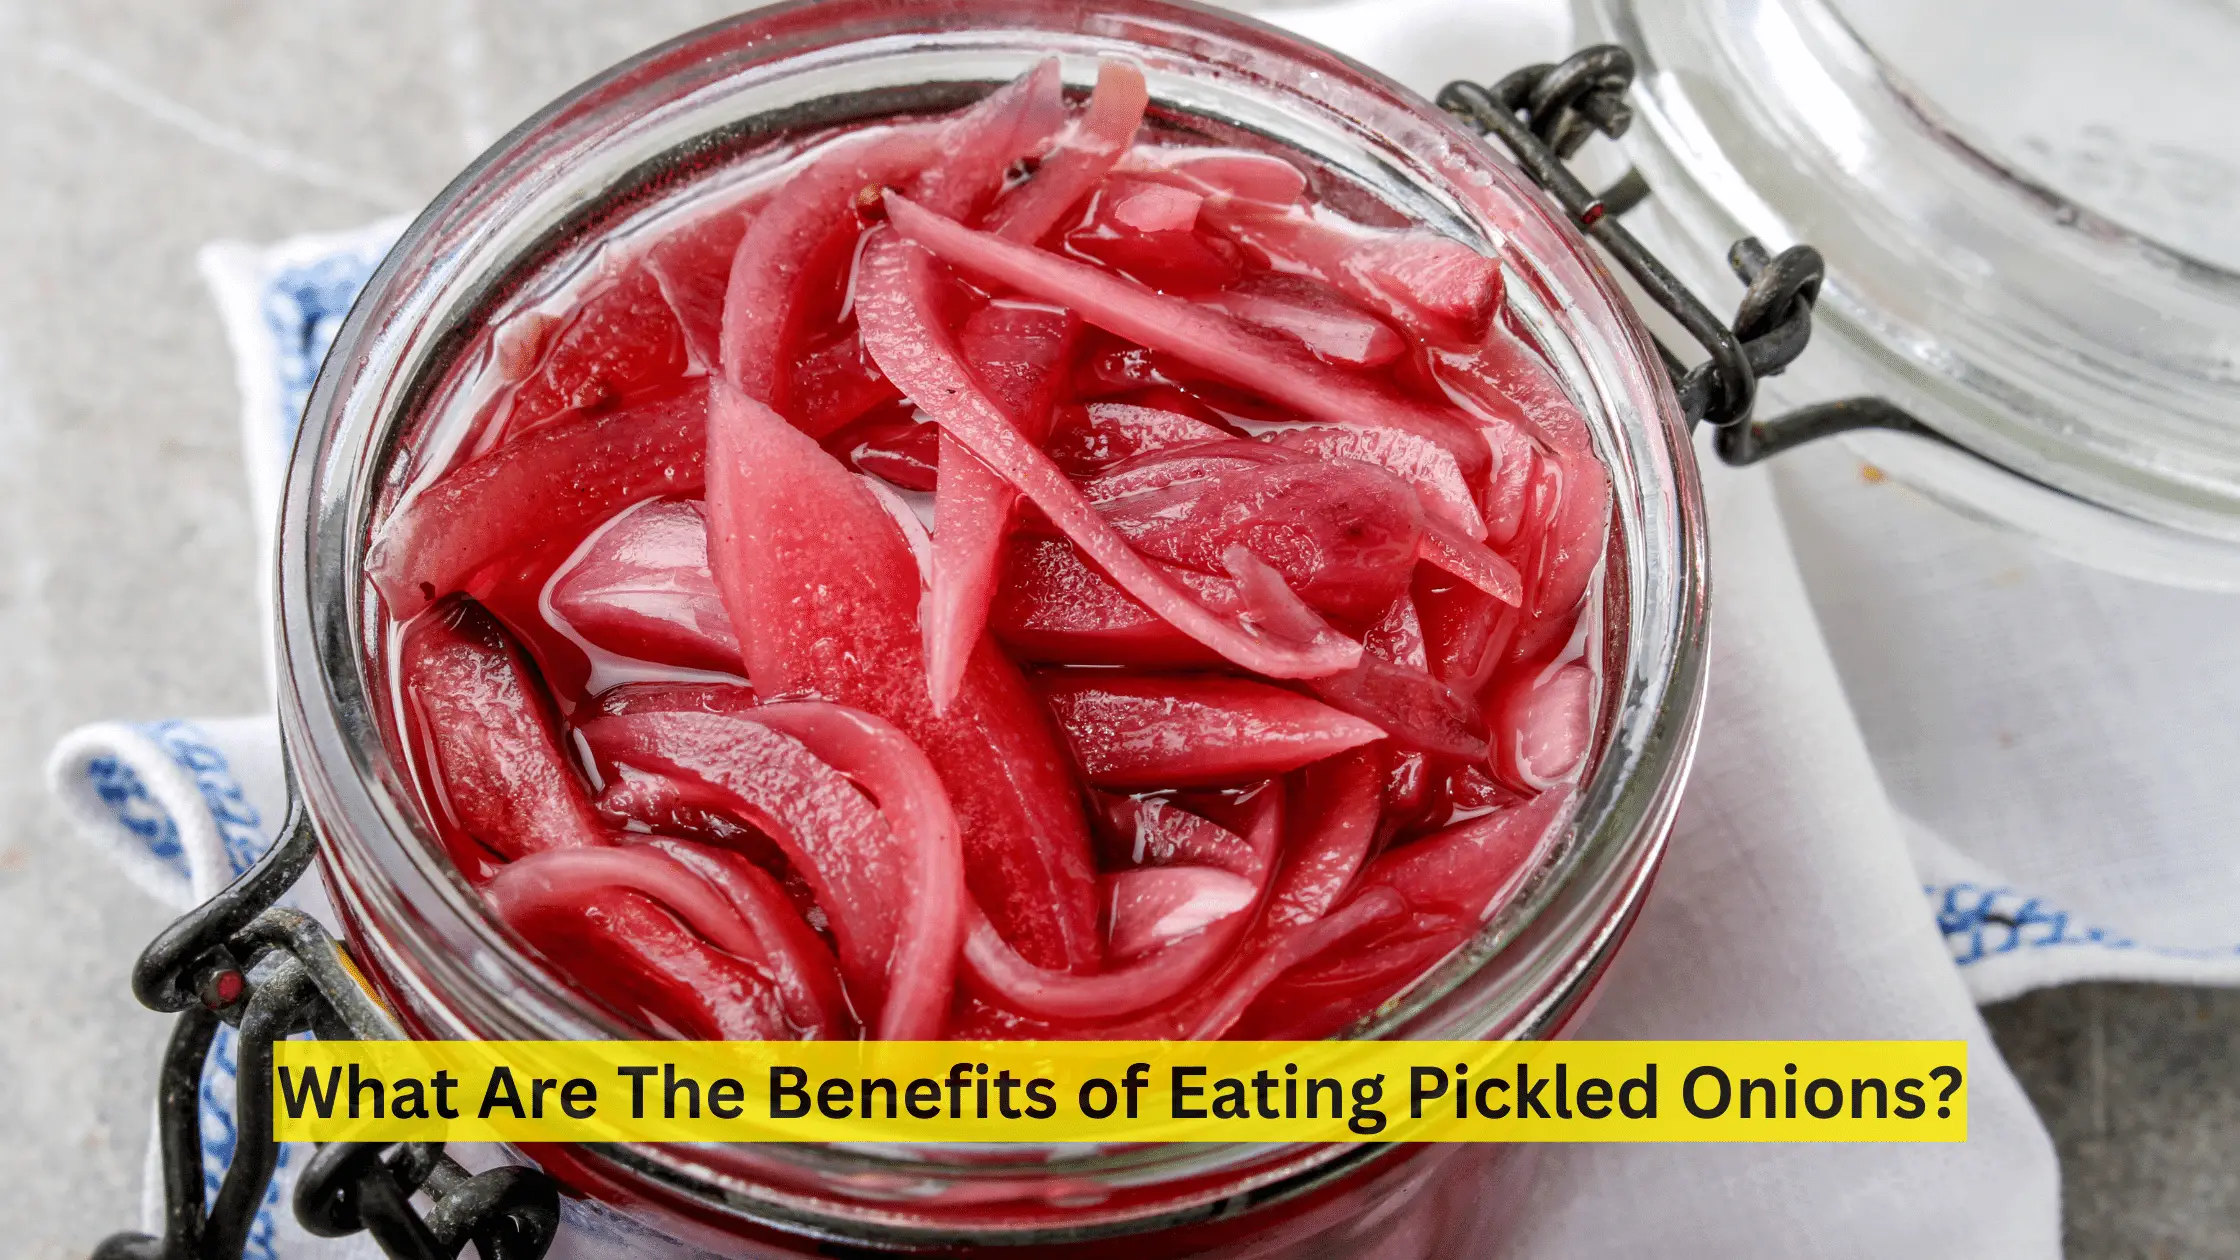 What Are The Benefits of Eating Pickled Onions